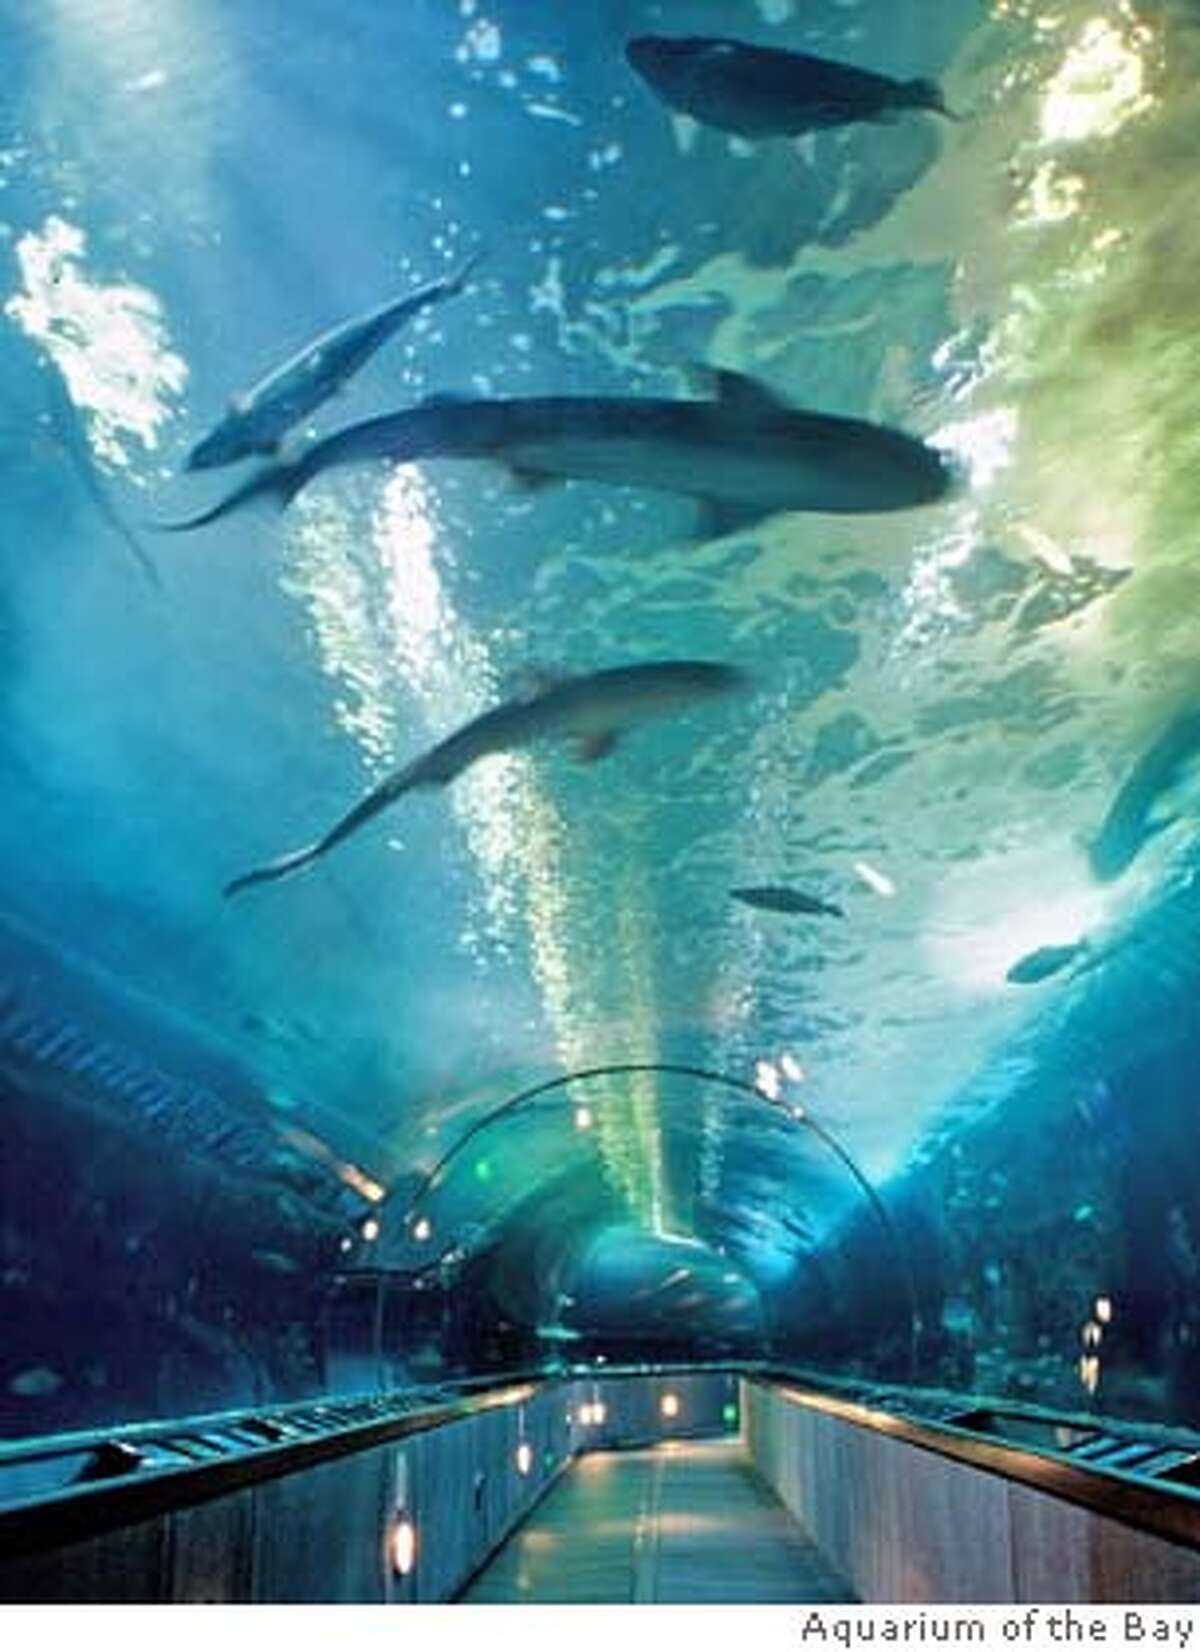 The tunnel at Aquarium of the Bay in SF will have a family sleepover under the shark tank 1/26/2008 Ran on: 01-20-2008 Aquarium of the Bay is hosting a Sleep With the Sharks Family Sleepover on Saturday.